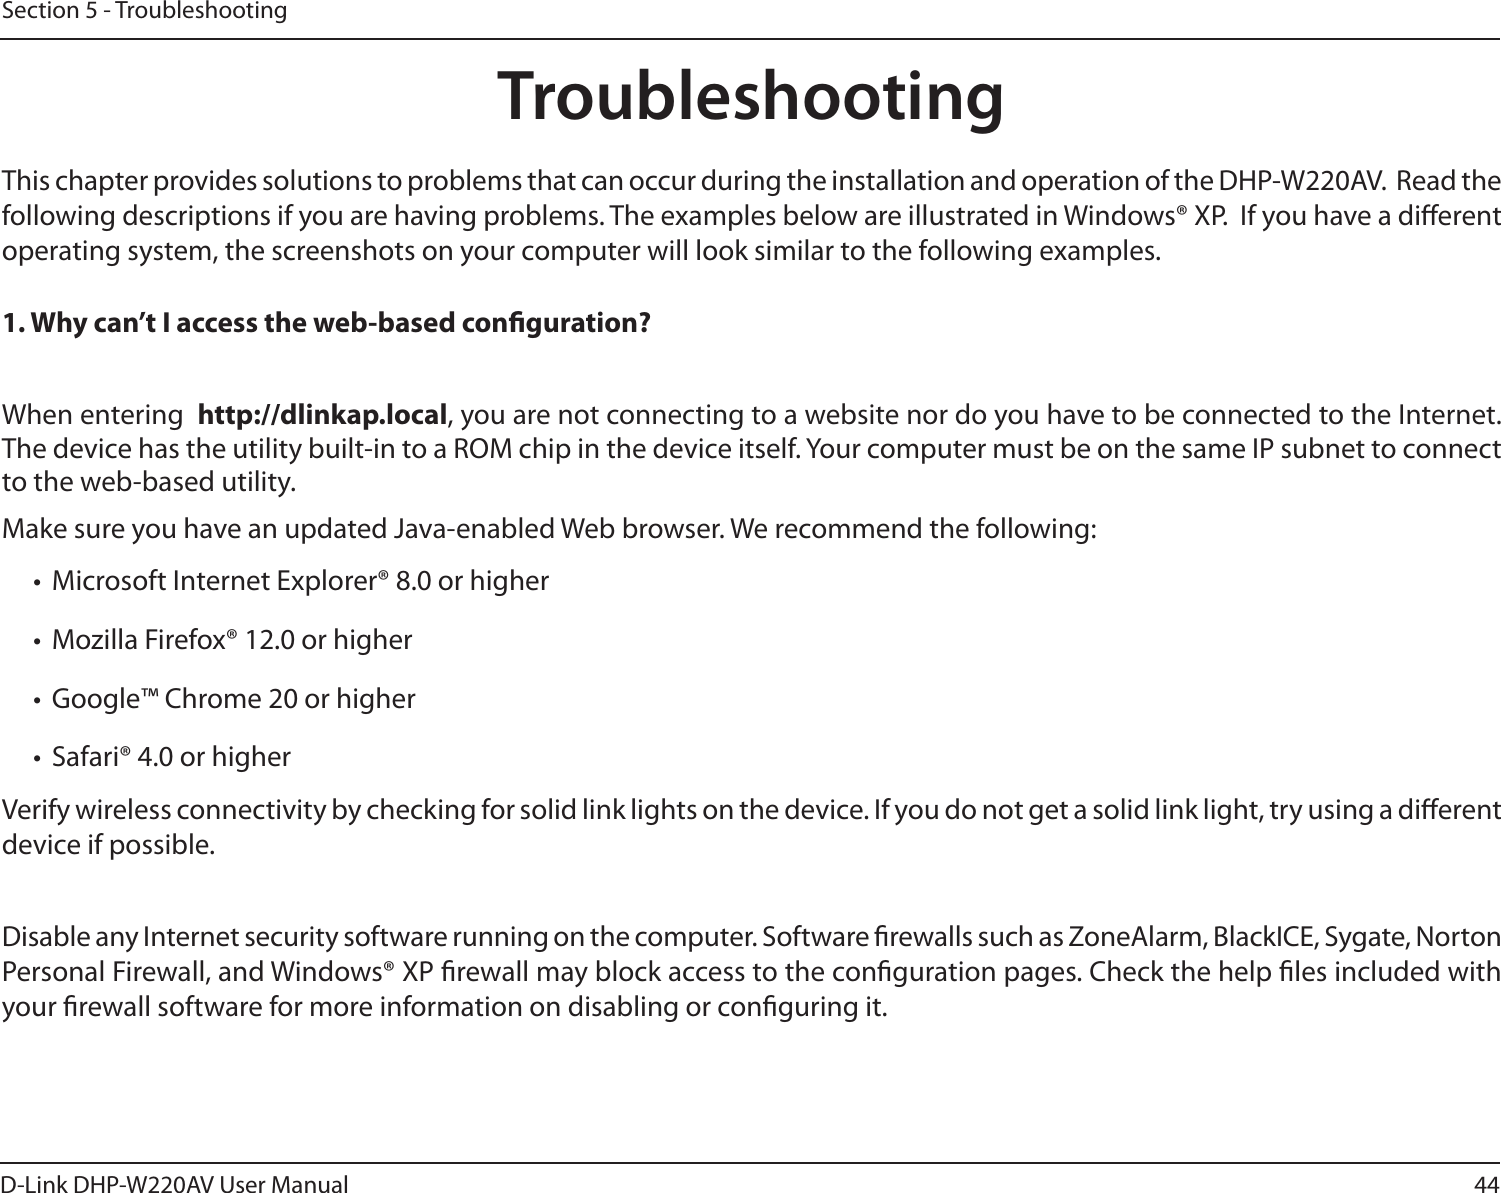 44D-Link DHP-W220AV User ManualSection 5 - TroubleshootingTroubleshootingThis chapter provides solutions to problems that can occur during the installation and operation of the DHP-W220AV.  Read the following descriptions if you are having problems. The examples below are illustrated in Windows® XP.  If you have a dierent operating system, the screenshots on your computer will look similar to the following examples.1. Why can’t I access the web-based conguration?When entering  http://dlinkap.local, you are not connecting to a website nor do you have to be connected to the Internet. The device has the utility built-in to a ROM chip in the device itself. Your computer must be on the same IP subnet to connect to the web-based utility. Make sure you have an updated Java-enabled Web browser. We recommend the following: •  Microsoft Internet Explorer® 8.0 or higher•  Mozilla Firefox® 12.0 or higher•  Google™ Chrome 20 or higher•  Safari® 4.0 or higherVerify wireless connectivity by checking for solid link lights on the device. If you do not get a solid link light, try using a dierent device if possible.Disable any Internet security software running on the computer. Software rewalls such as ZoneAlarm, BlackICE, Sygate, Norton Personal Firewall, and Windows® XP rewall may block access to the conguration pages. Check the help les included with your rewall software for more information on disabling or conguring it.